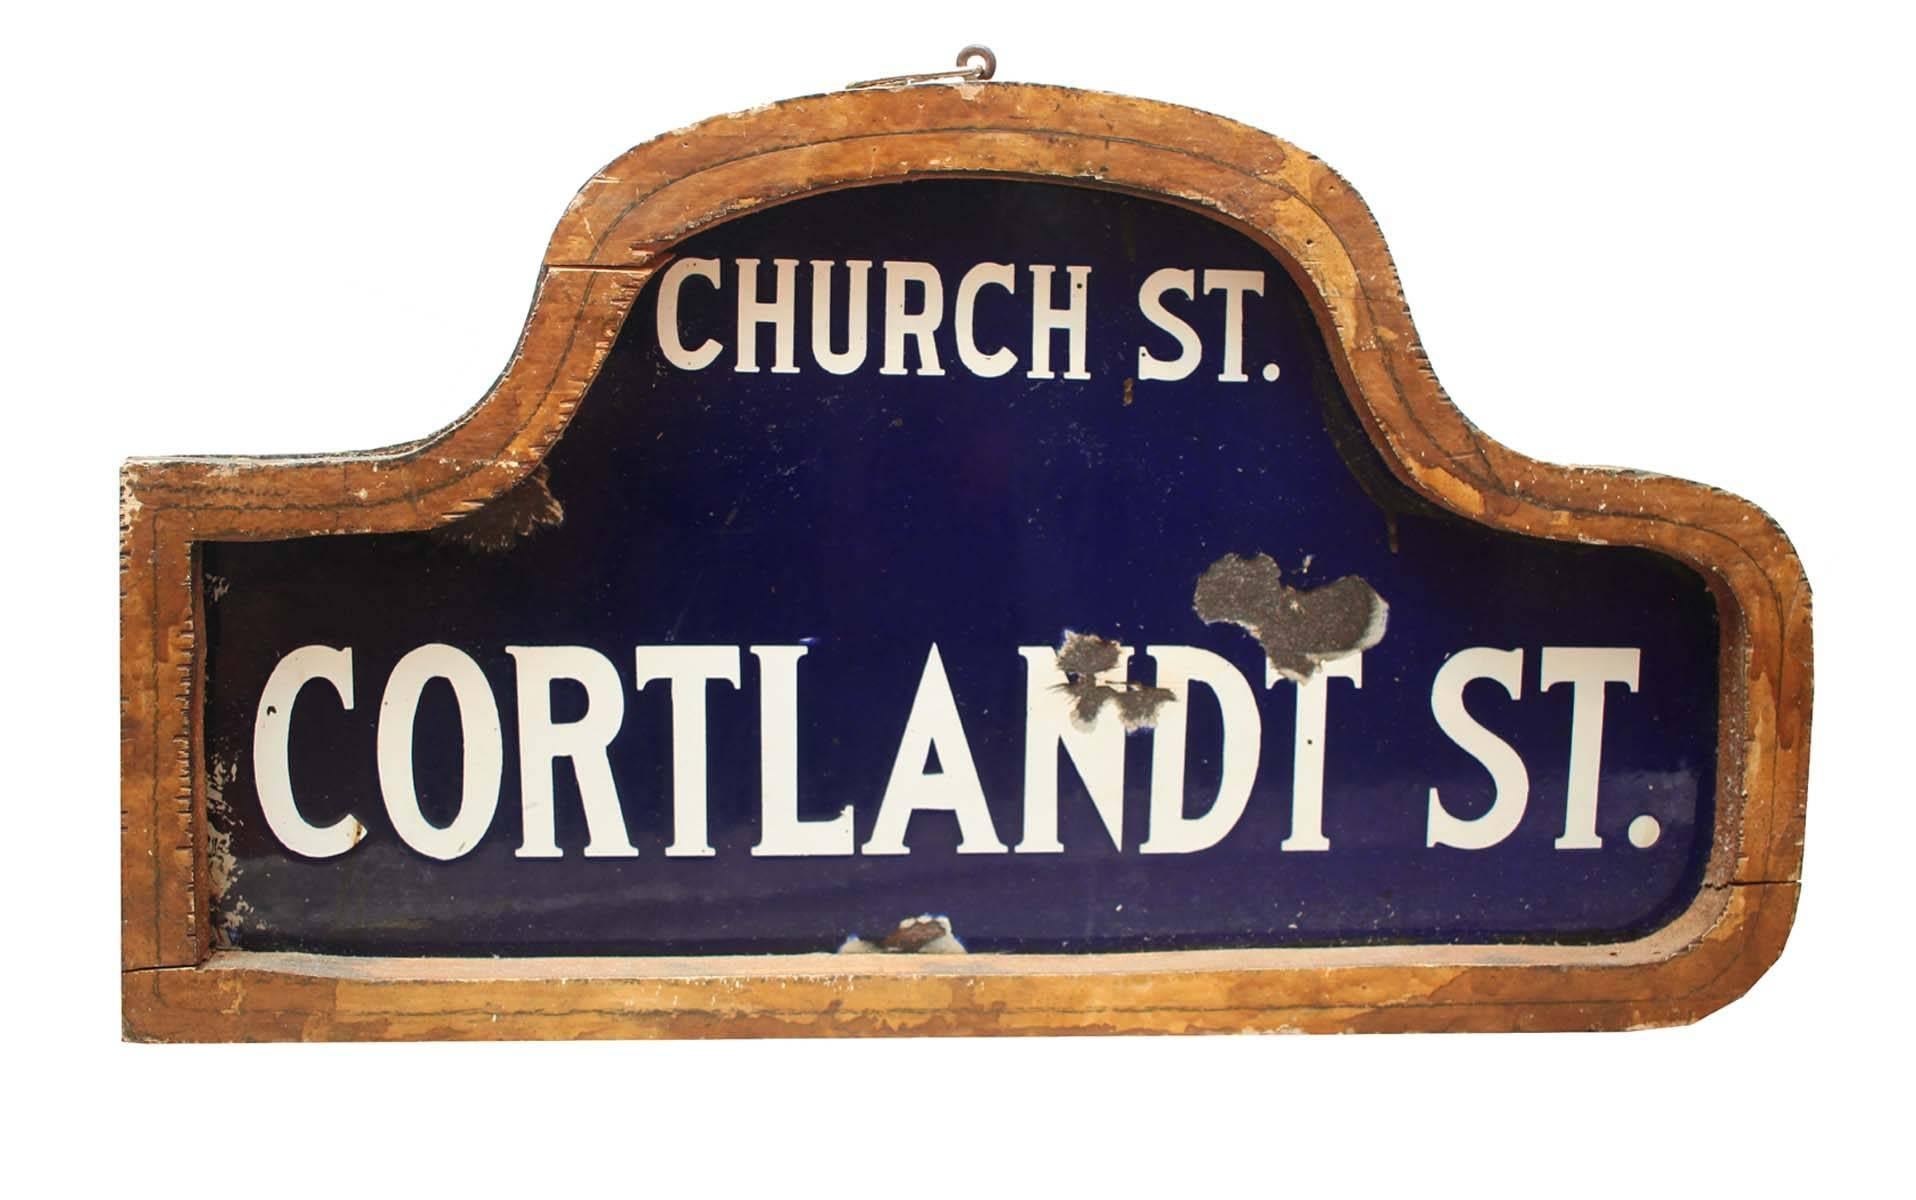 This is a vintage and historic New York City humpback porcelain street sign. Two-sided, this sign has the Classic blue and white porcelain finish. Lower Manhattan from the corner of Church and Cortlandt Street New York City, An amazing piece of New